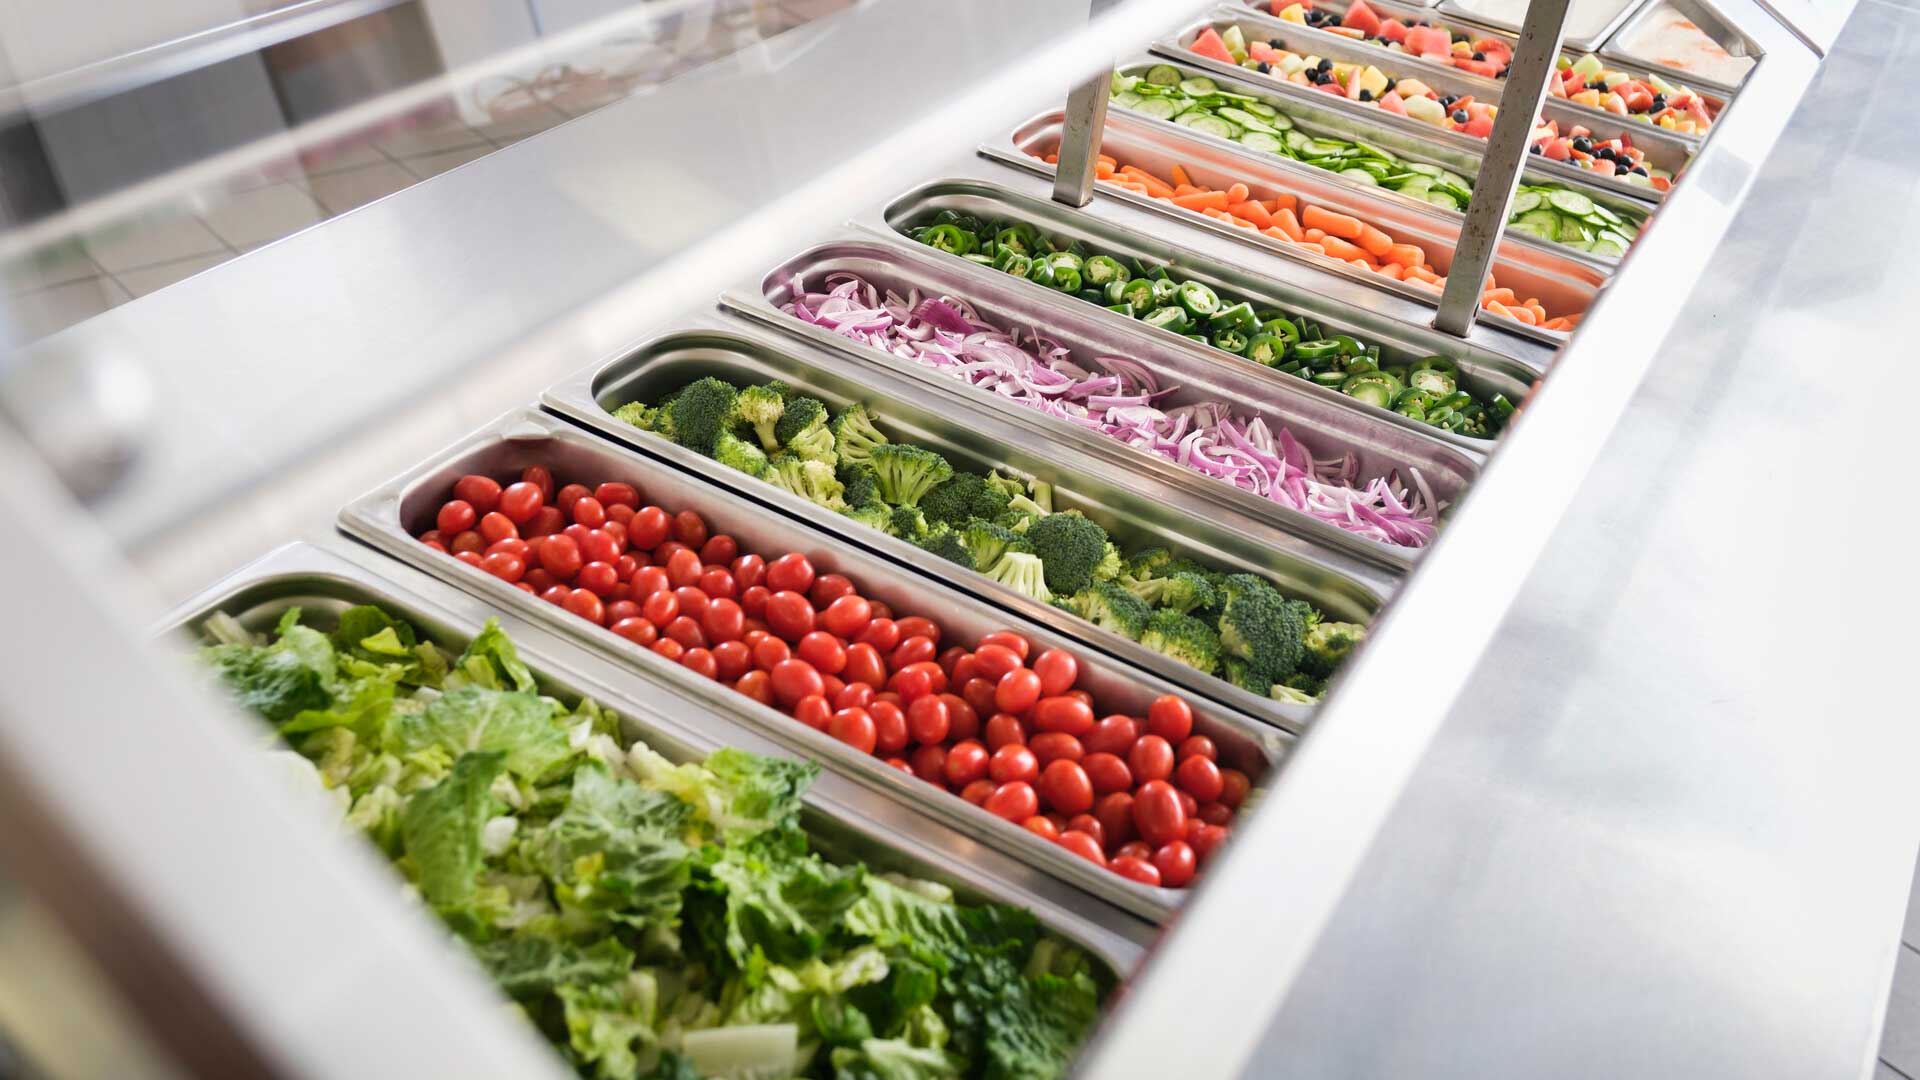 Overview of salad bar